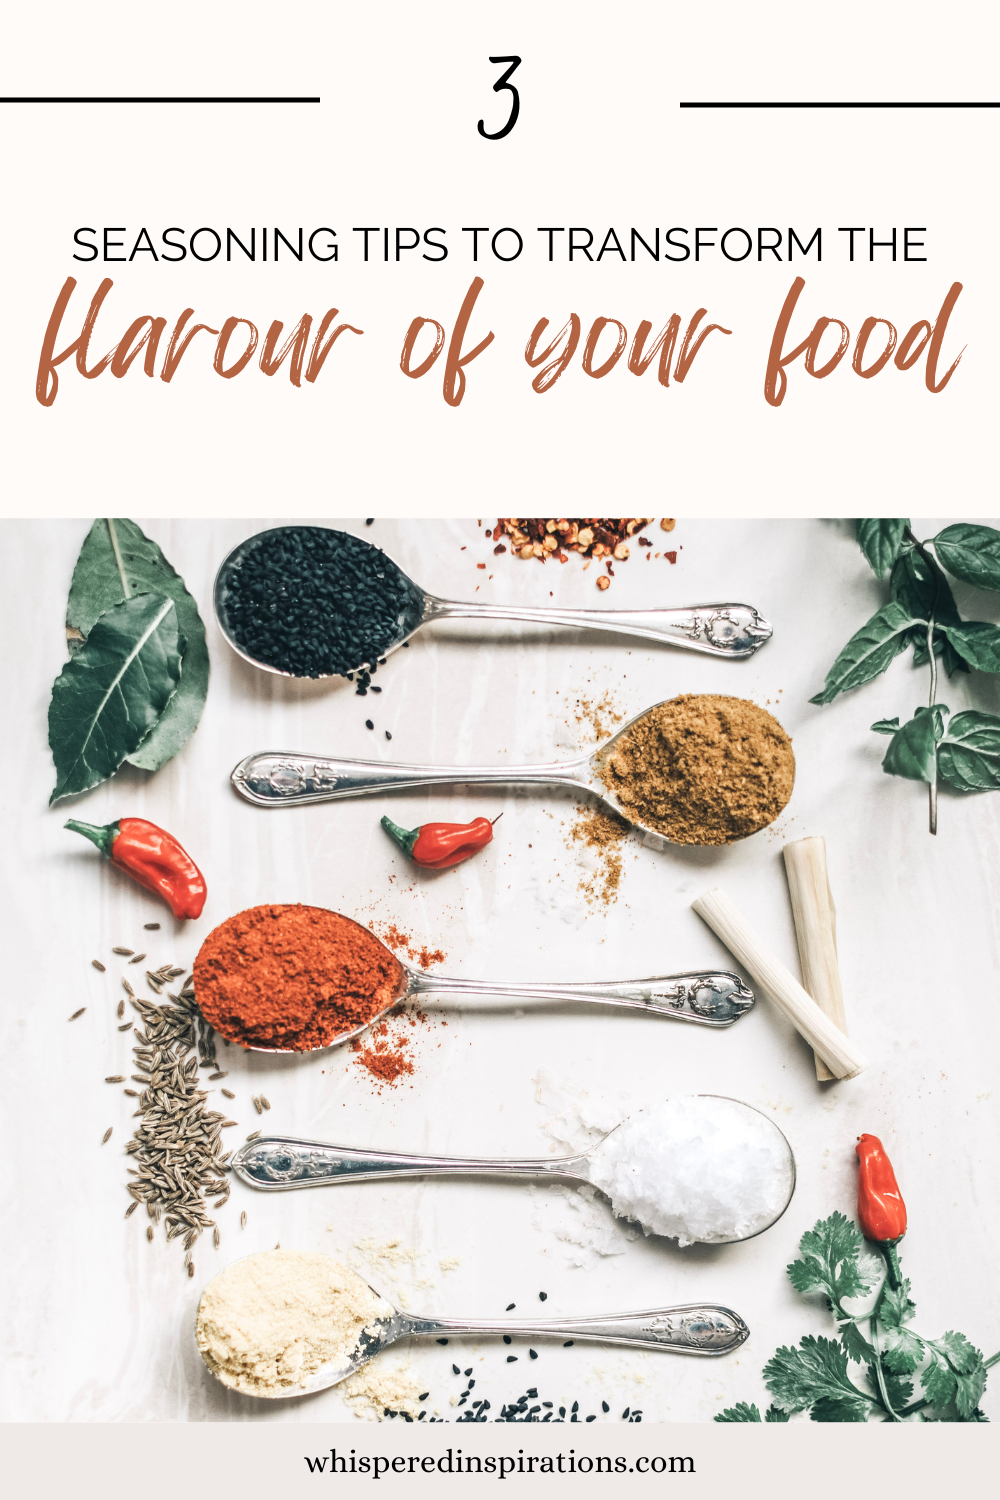 Silver spoons holding spices and herbs surround them. This article covers 3 seasoning tips to transform the flavor of your food.